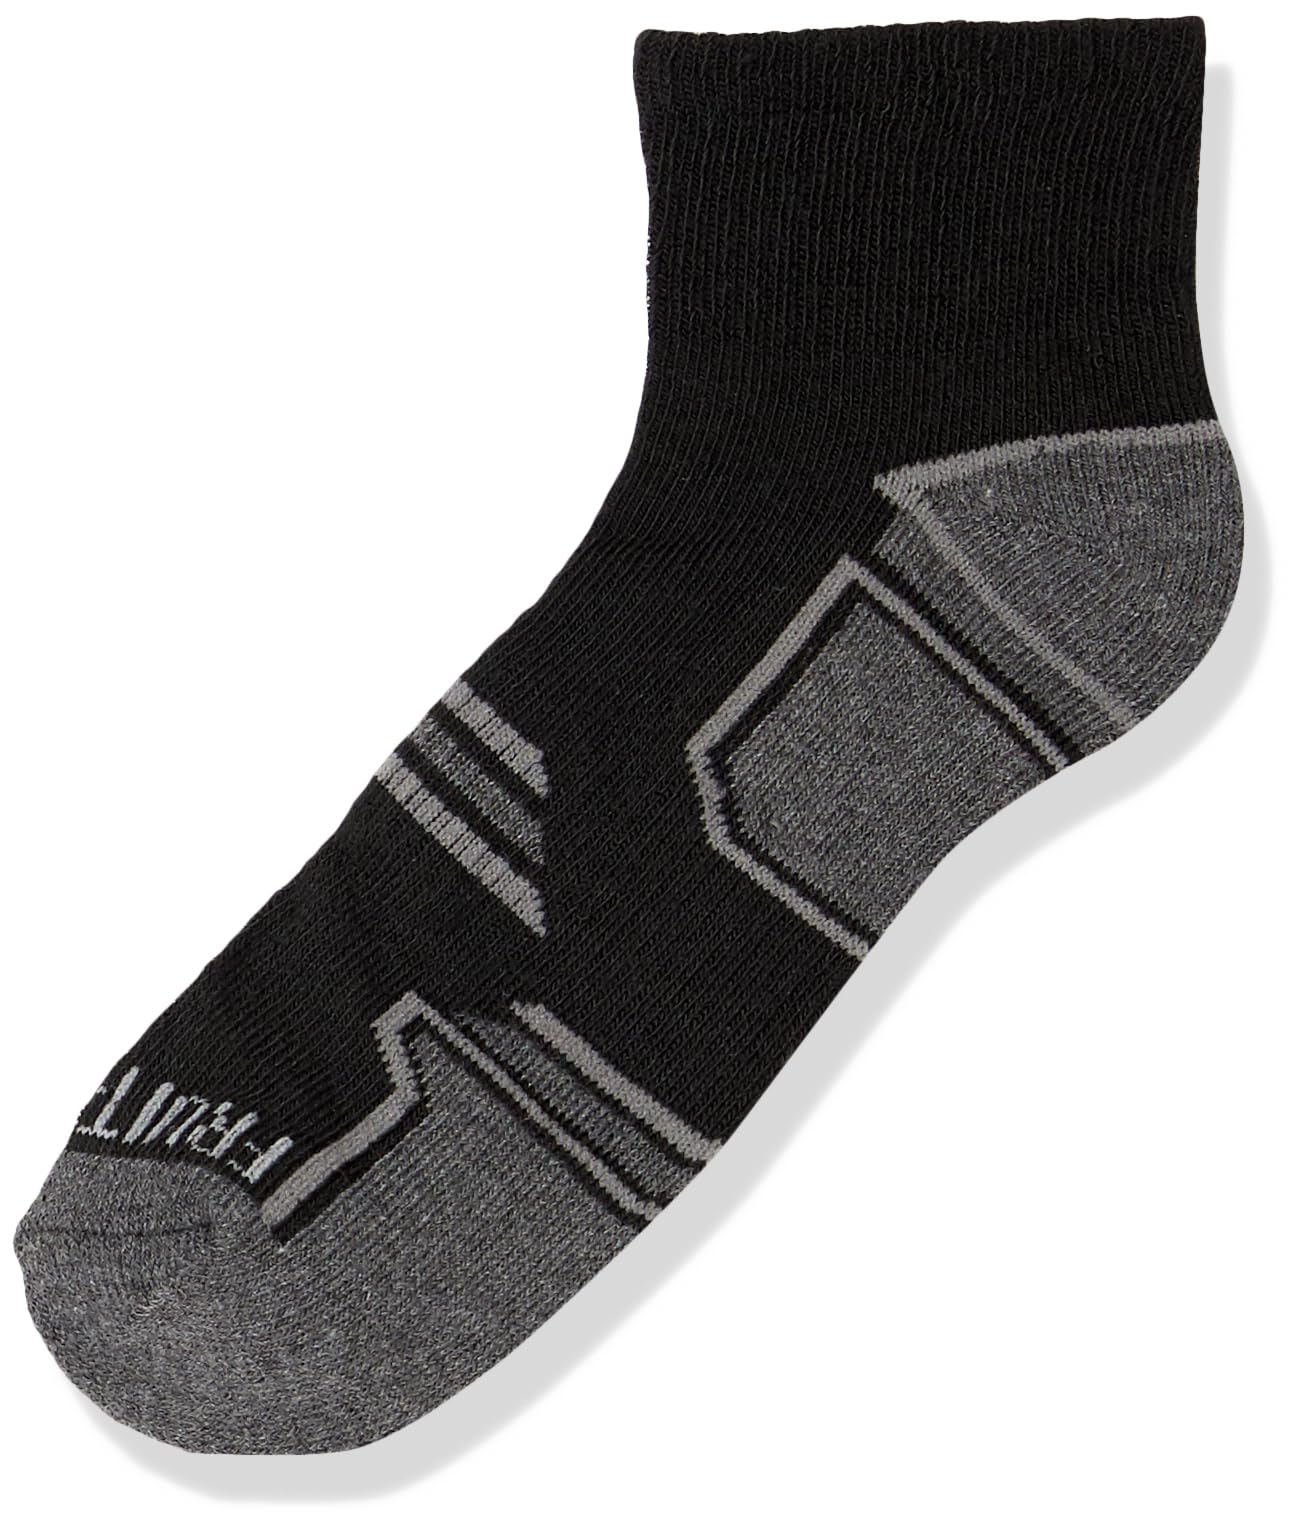 Fruit of the Loom Boys' Everyday Active Ankle Socks (12 Pack)